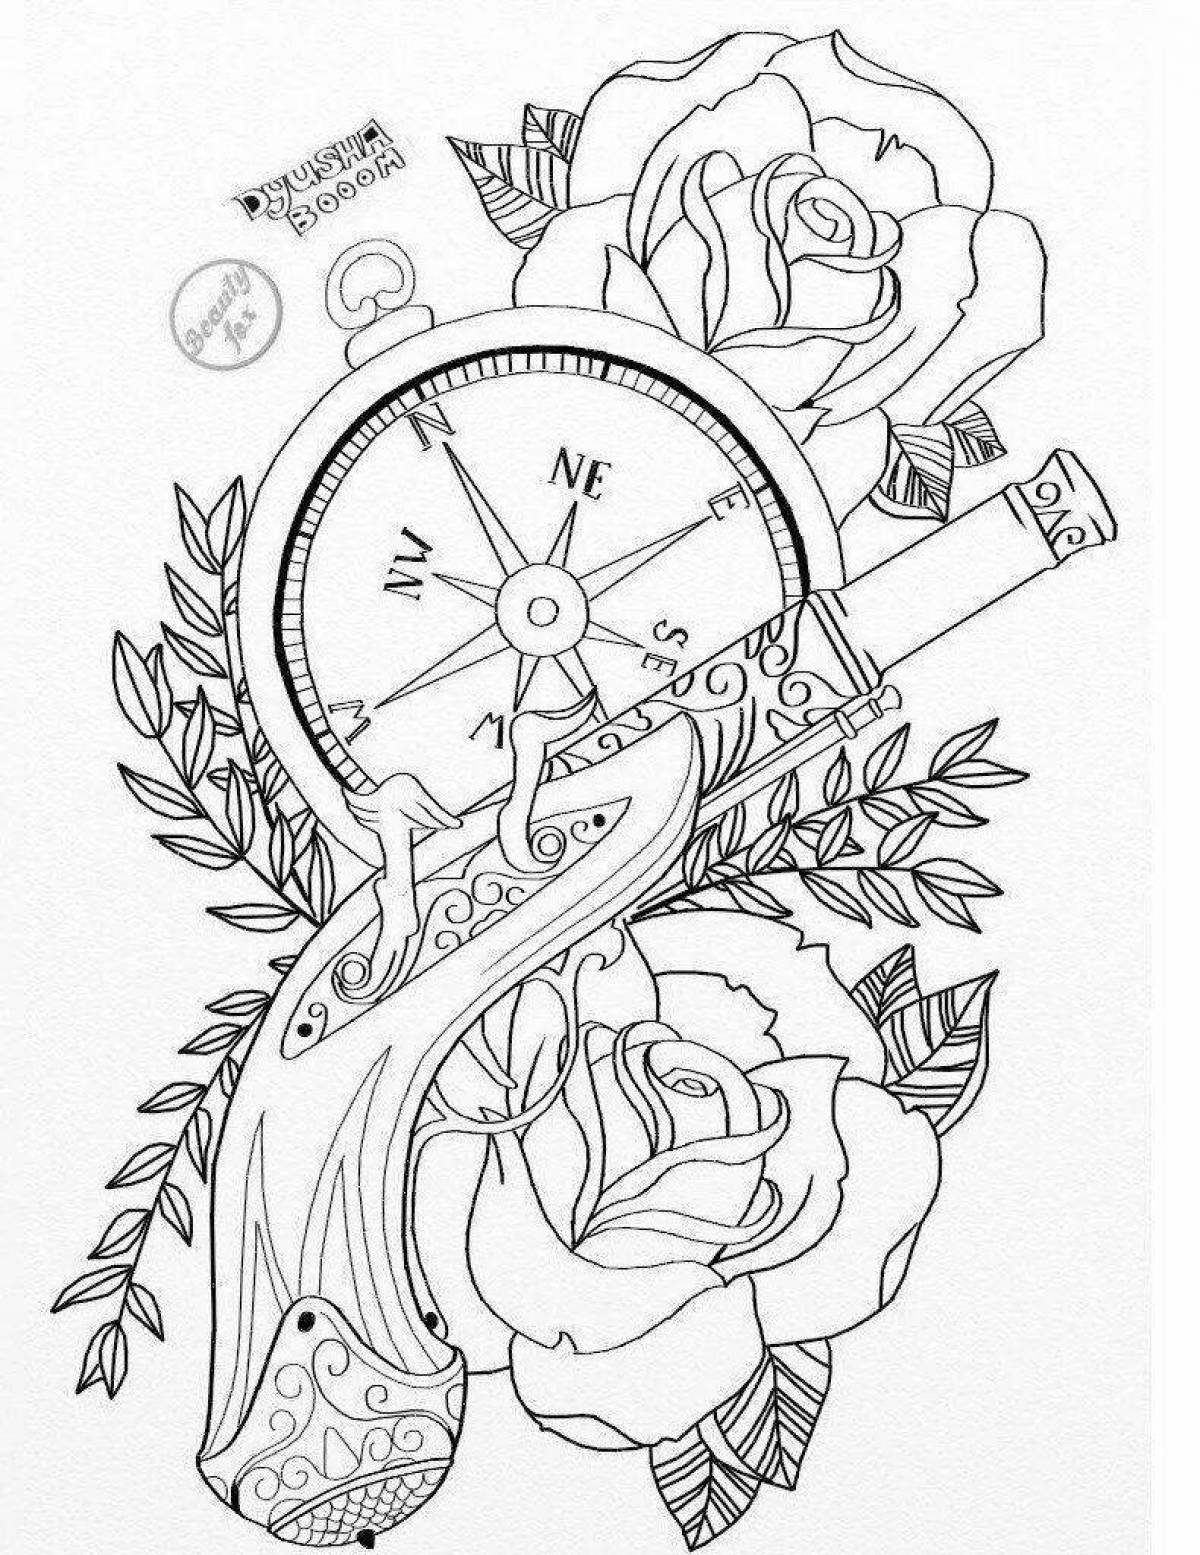 Animated old school coloring page